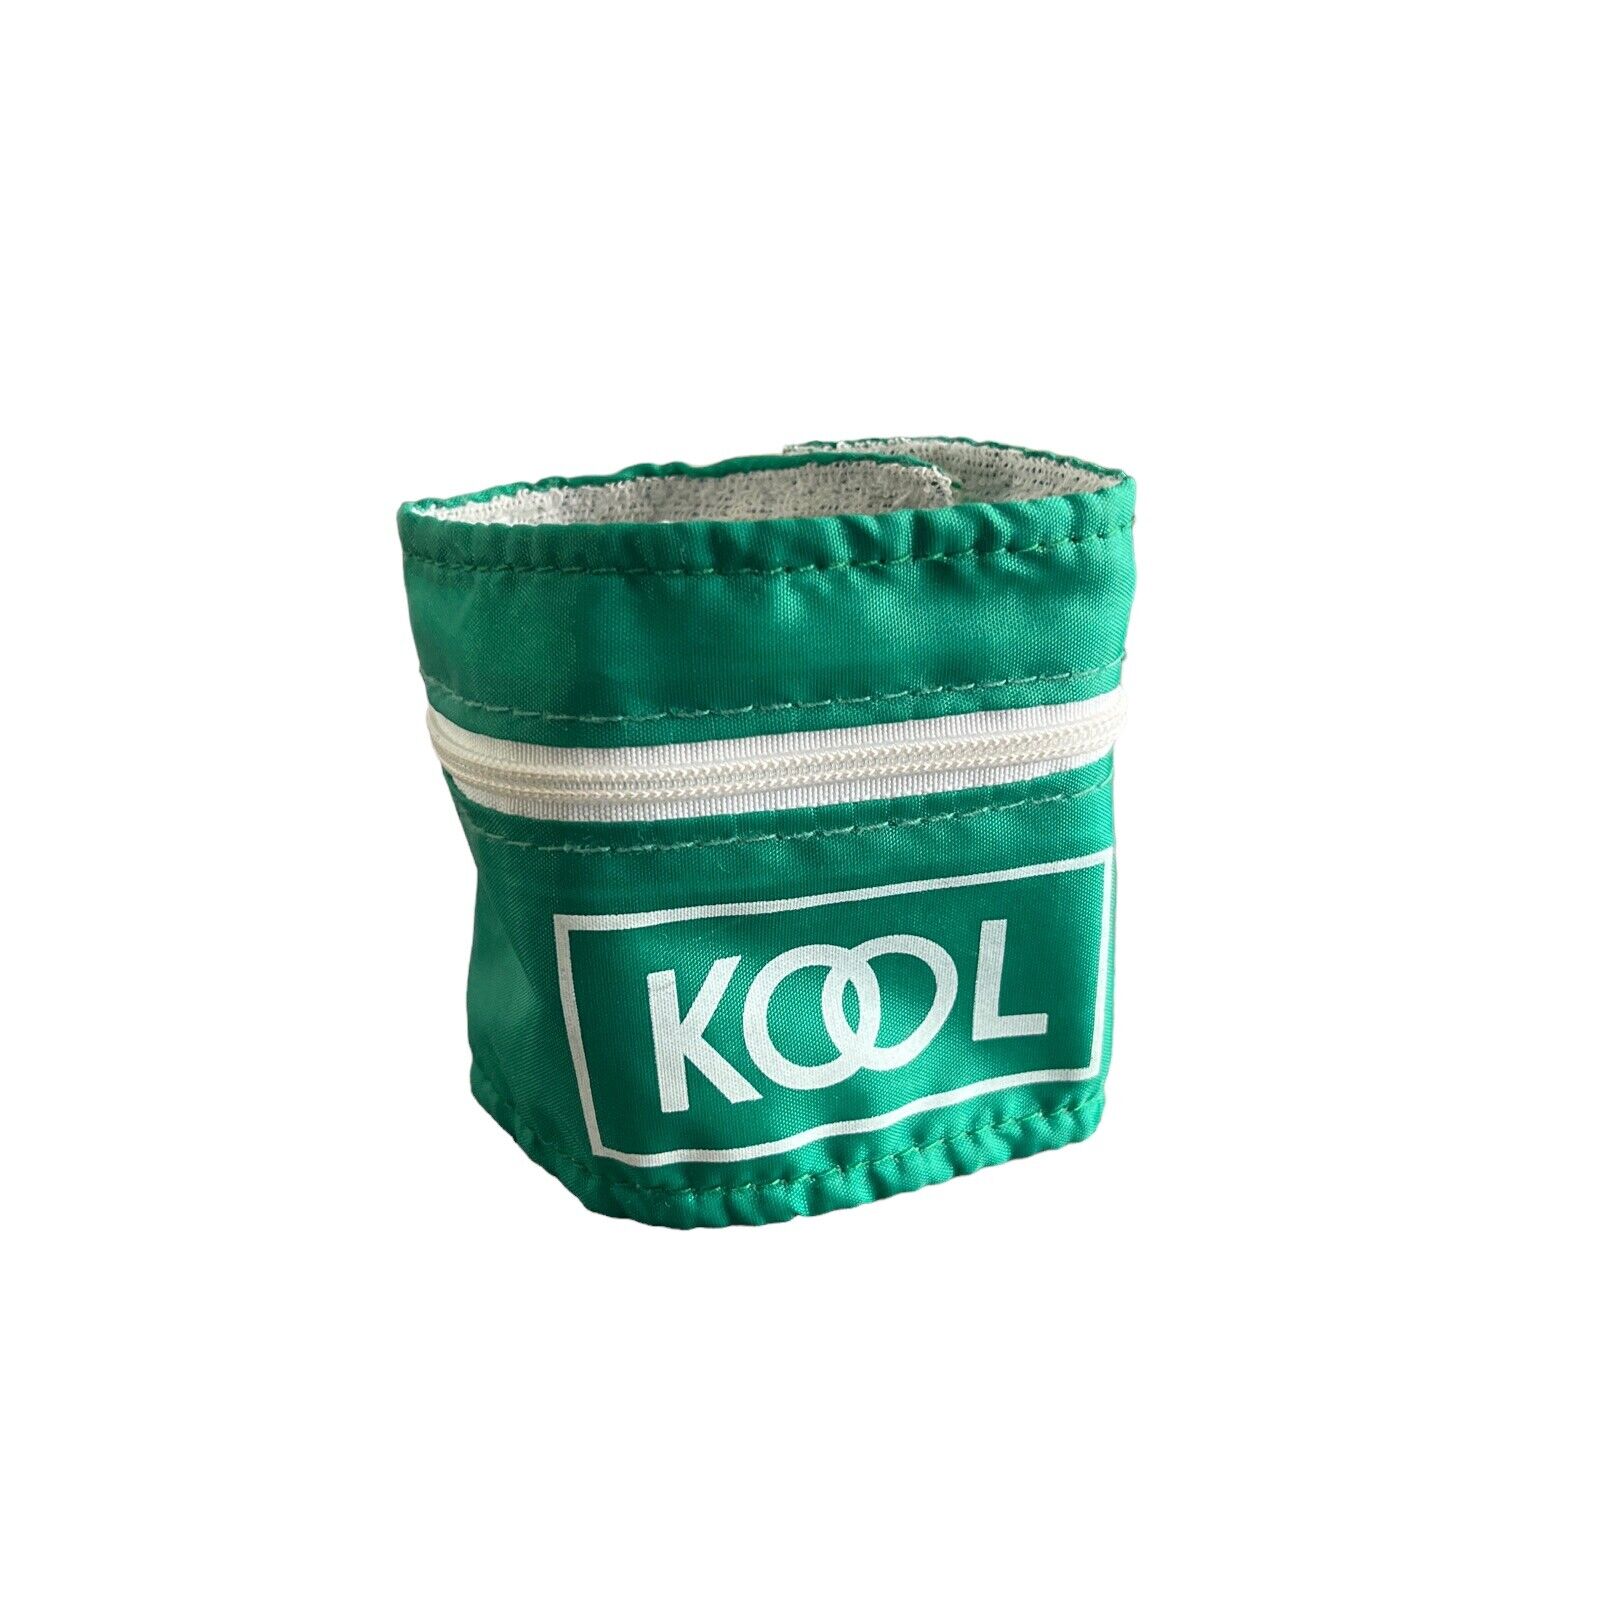 Awesome 1980’s Kool Cigarettes Zippered Wallet Jogging Wristband